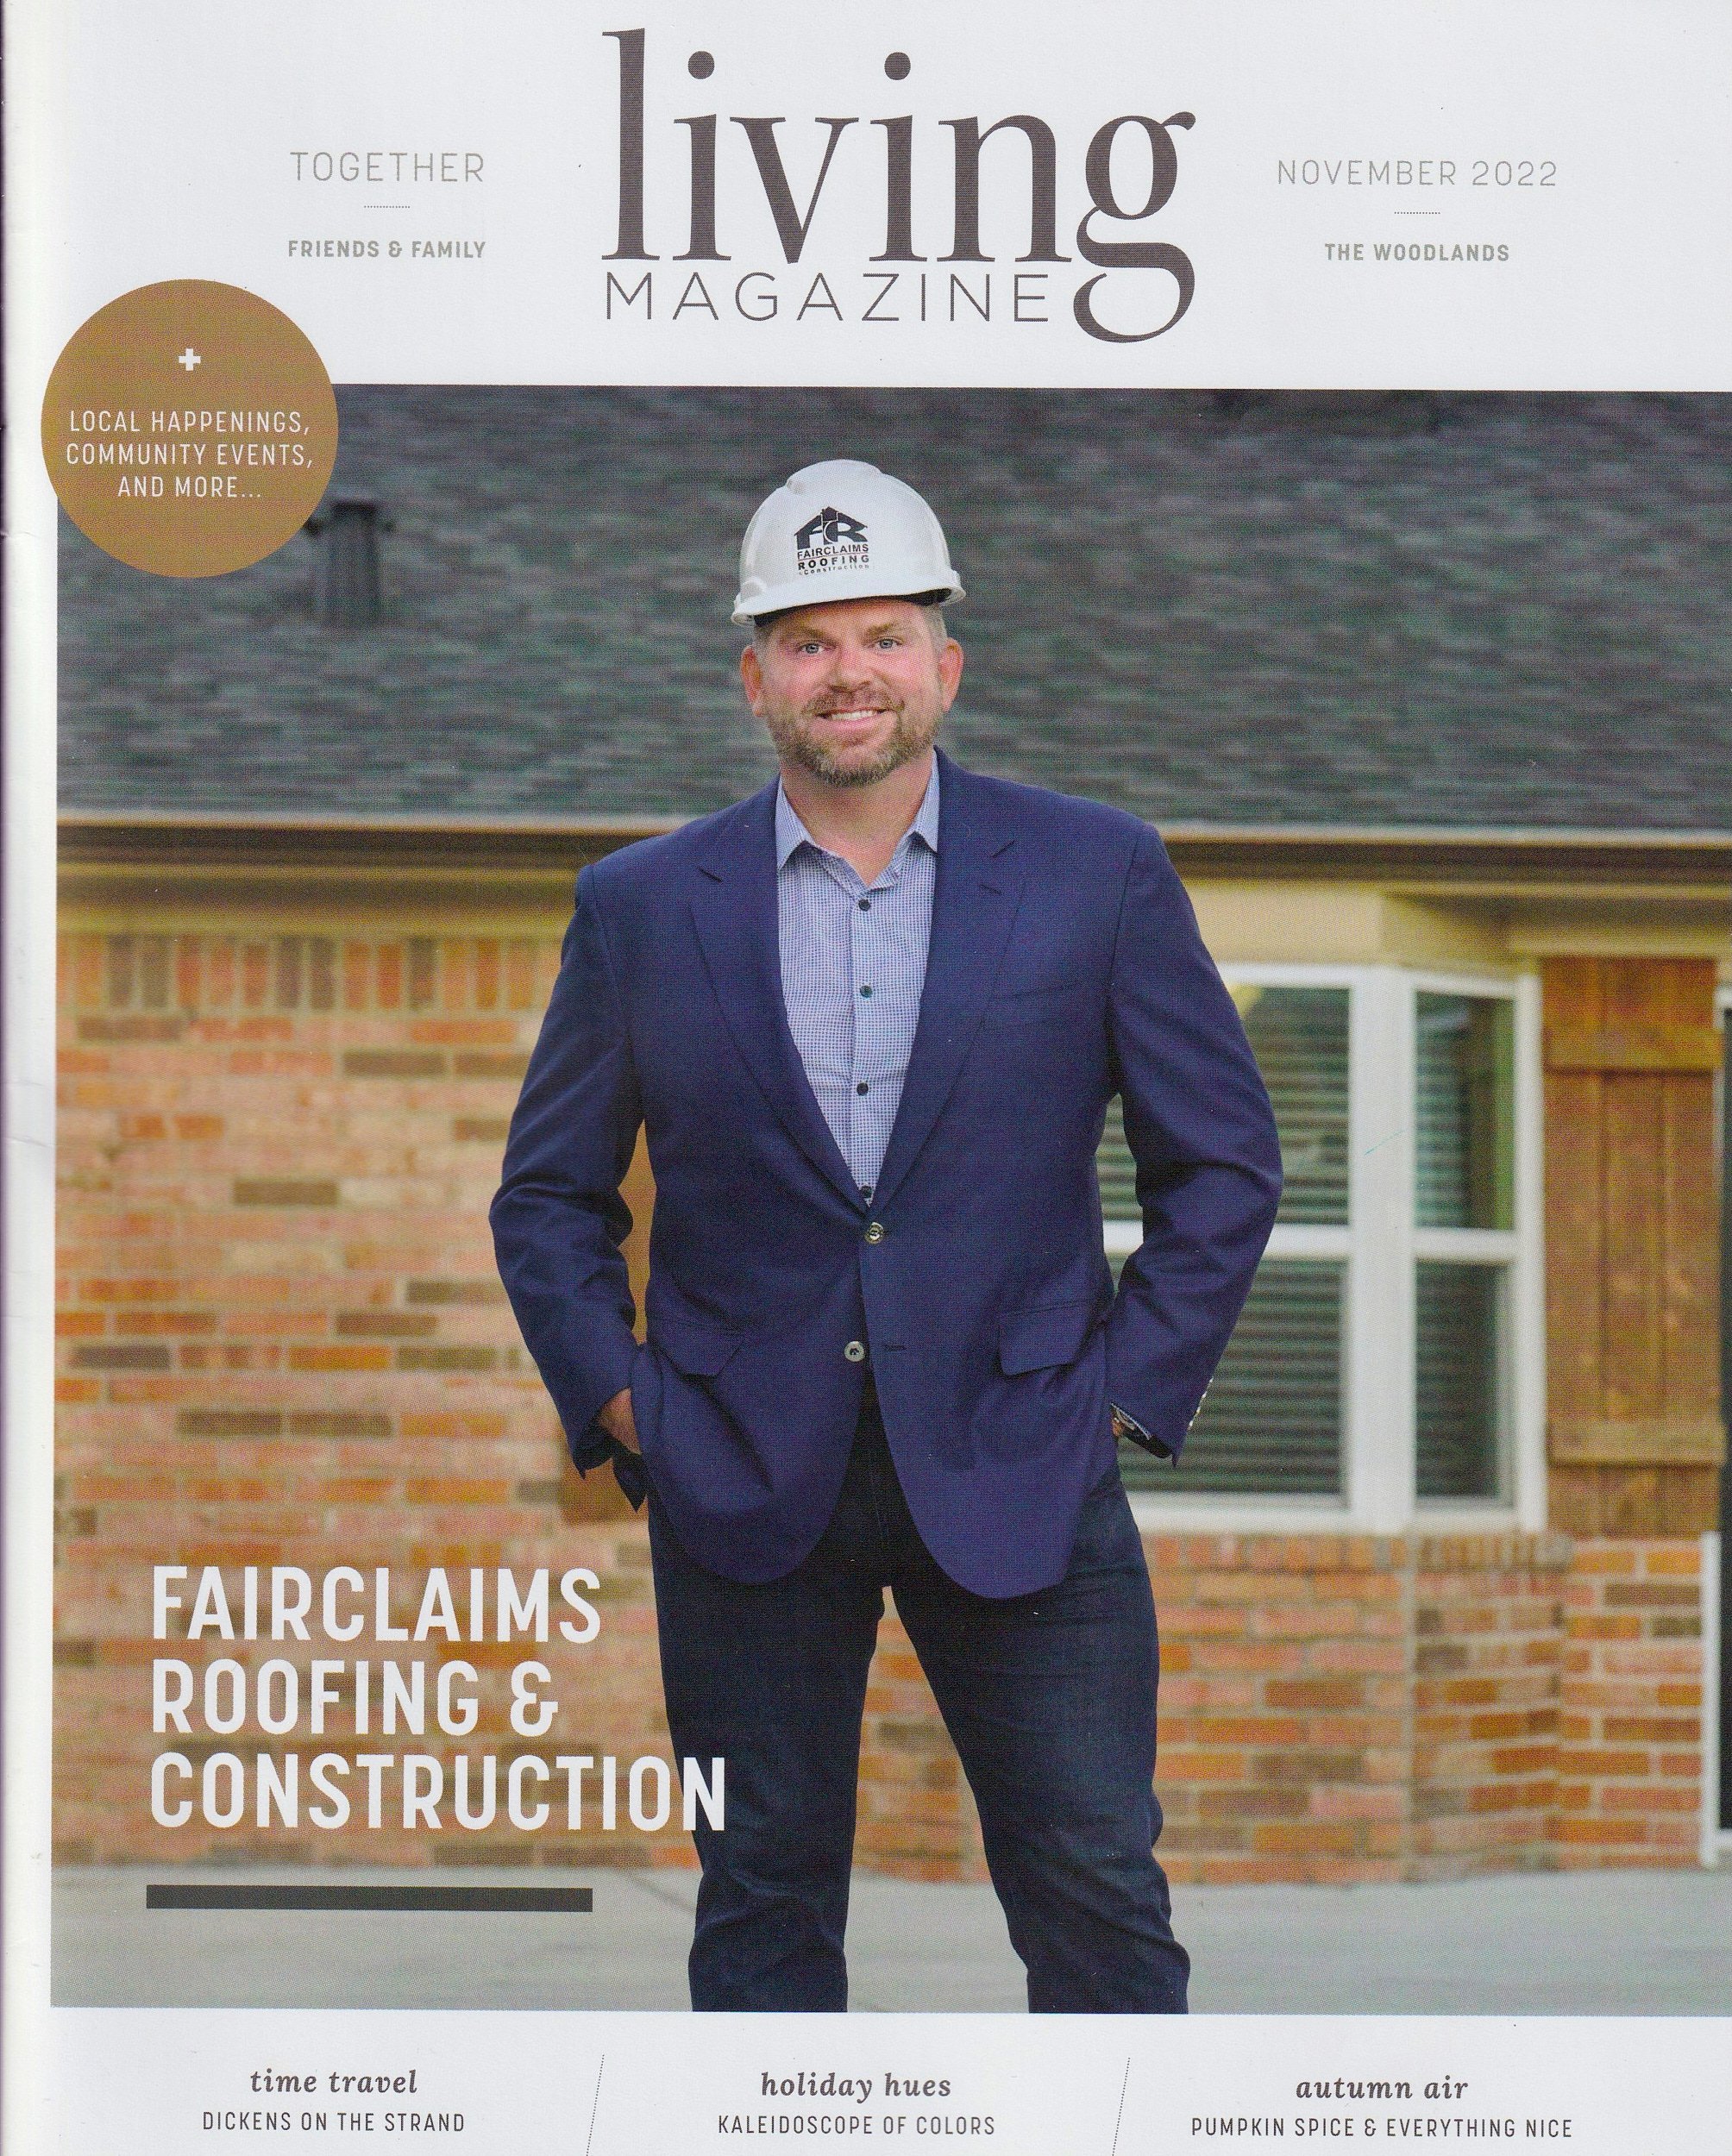  SPRING, TEXAS - SEPTEMBER 30th  2022: Justin O'Neal of Fairclaims Roofing & Construction is posing in a suit and helmet for environmental portraits at his office to promote his business at Living Magazine 